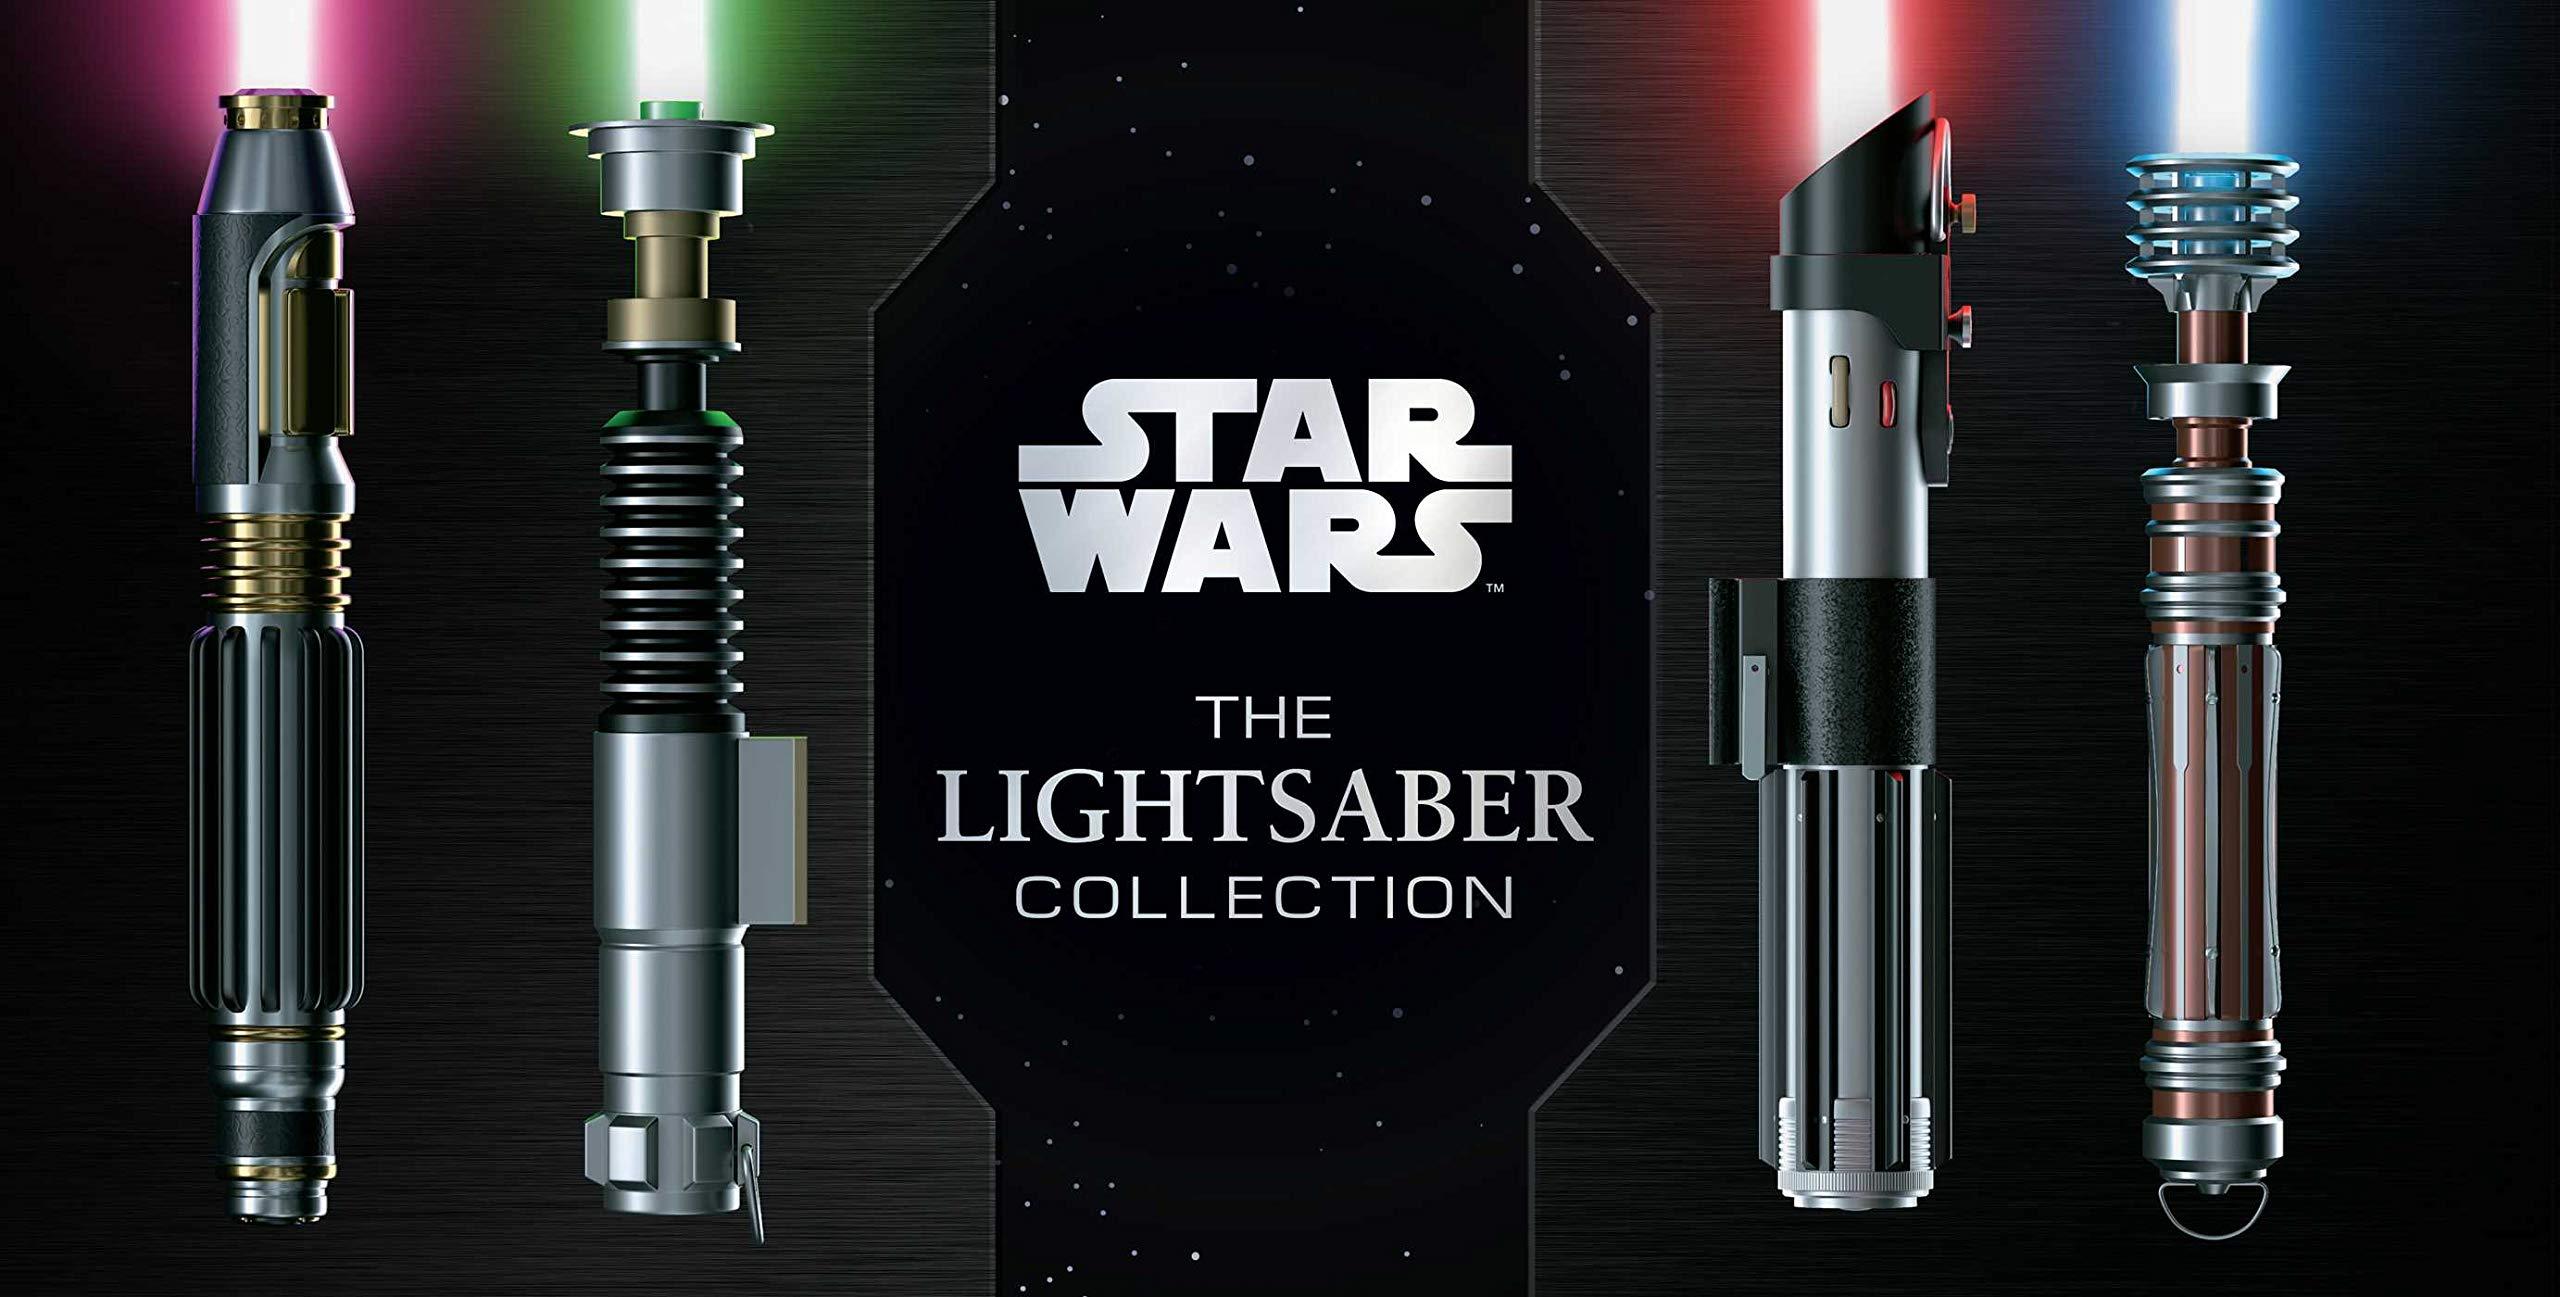 Star Wars The Lightsaber Collection Hardcover Book for $13.59